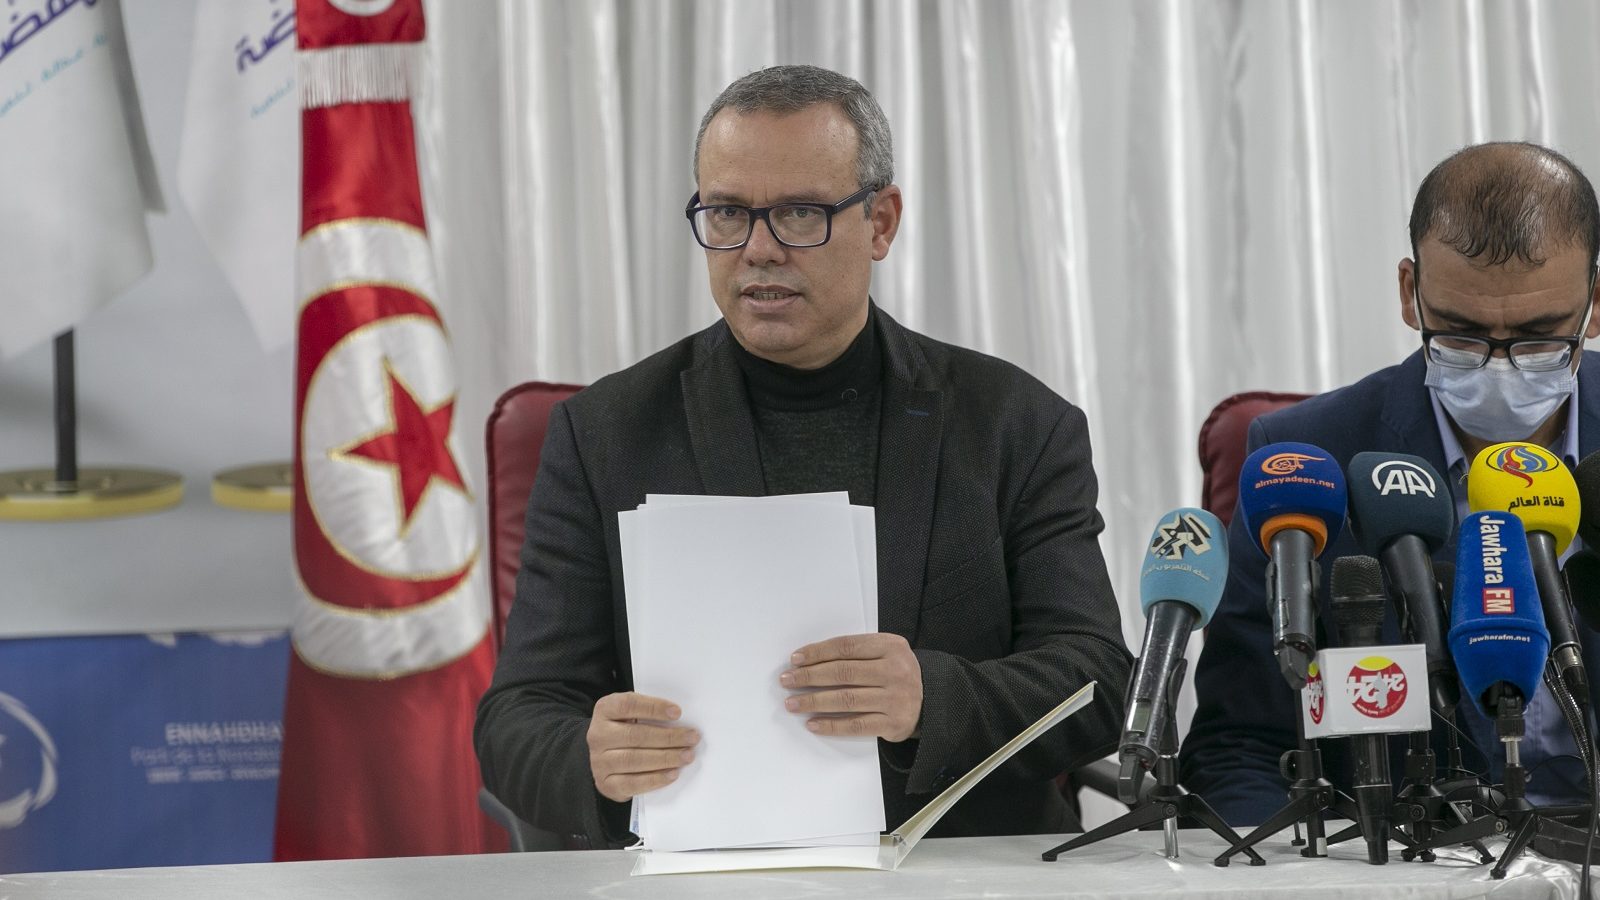 Tunisian Man Dies From Injuries Sustained in Anti-government Protest